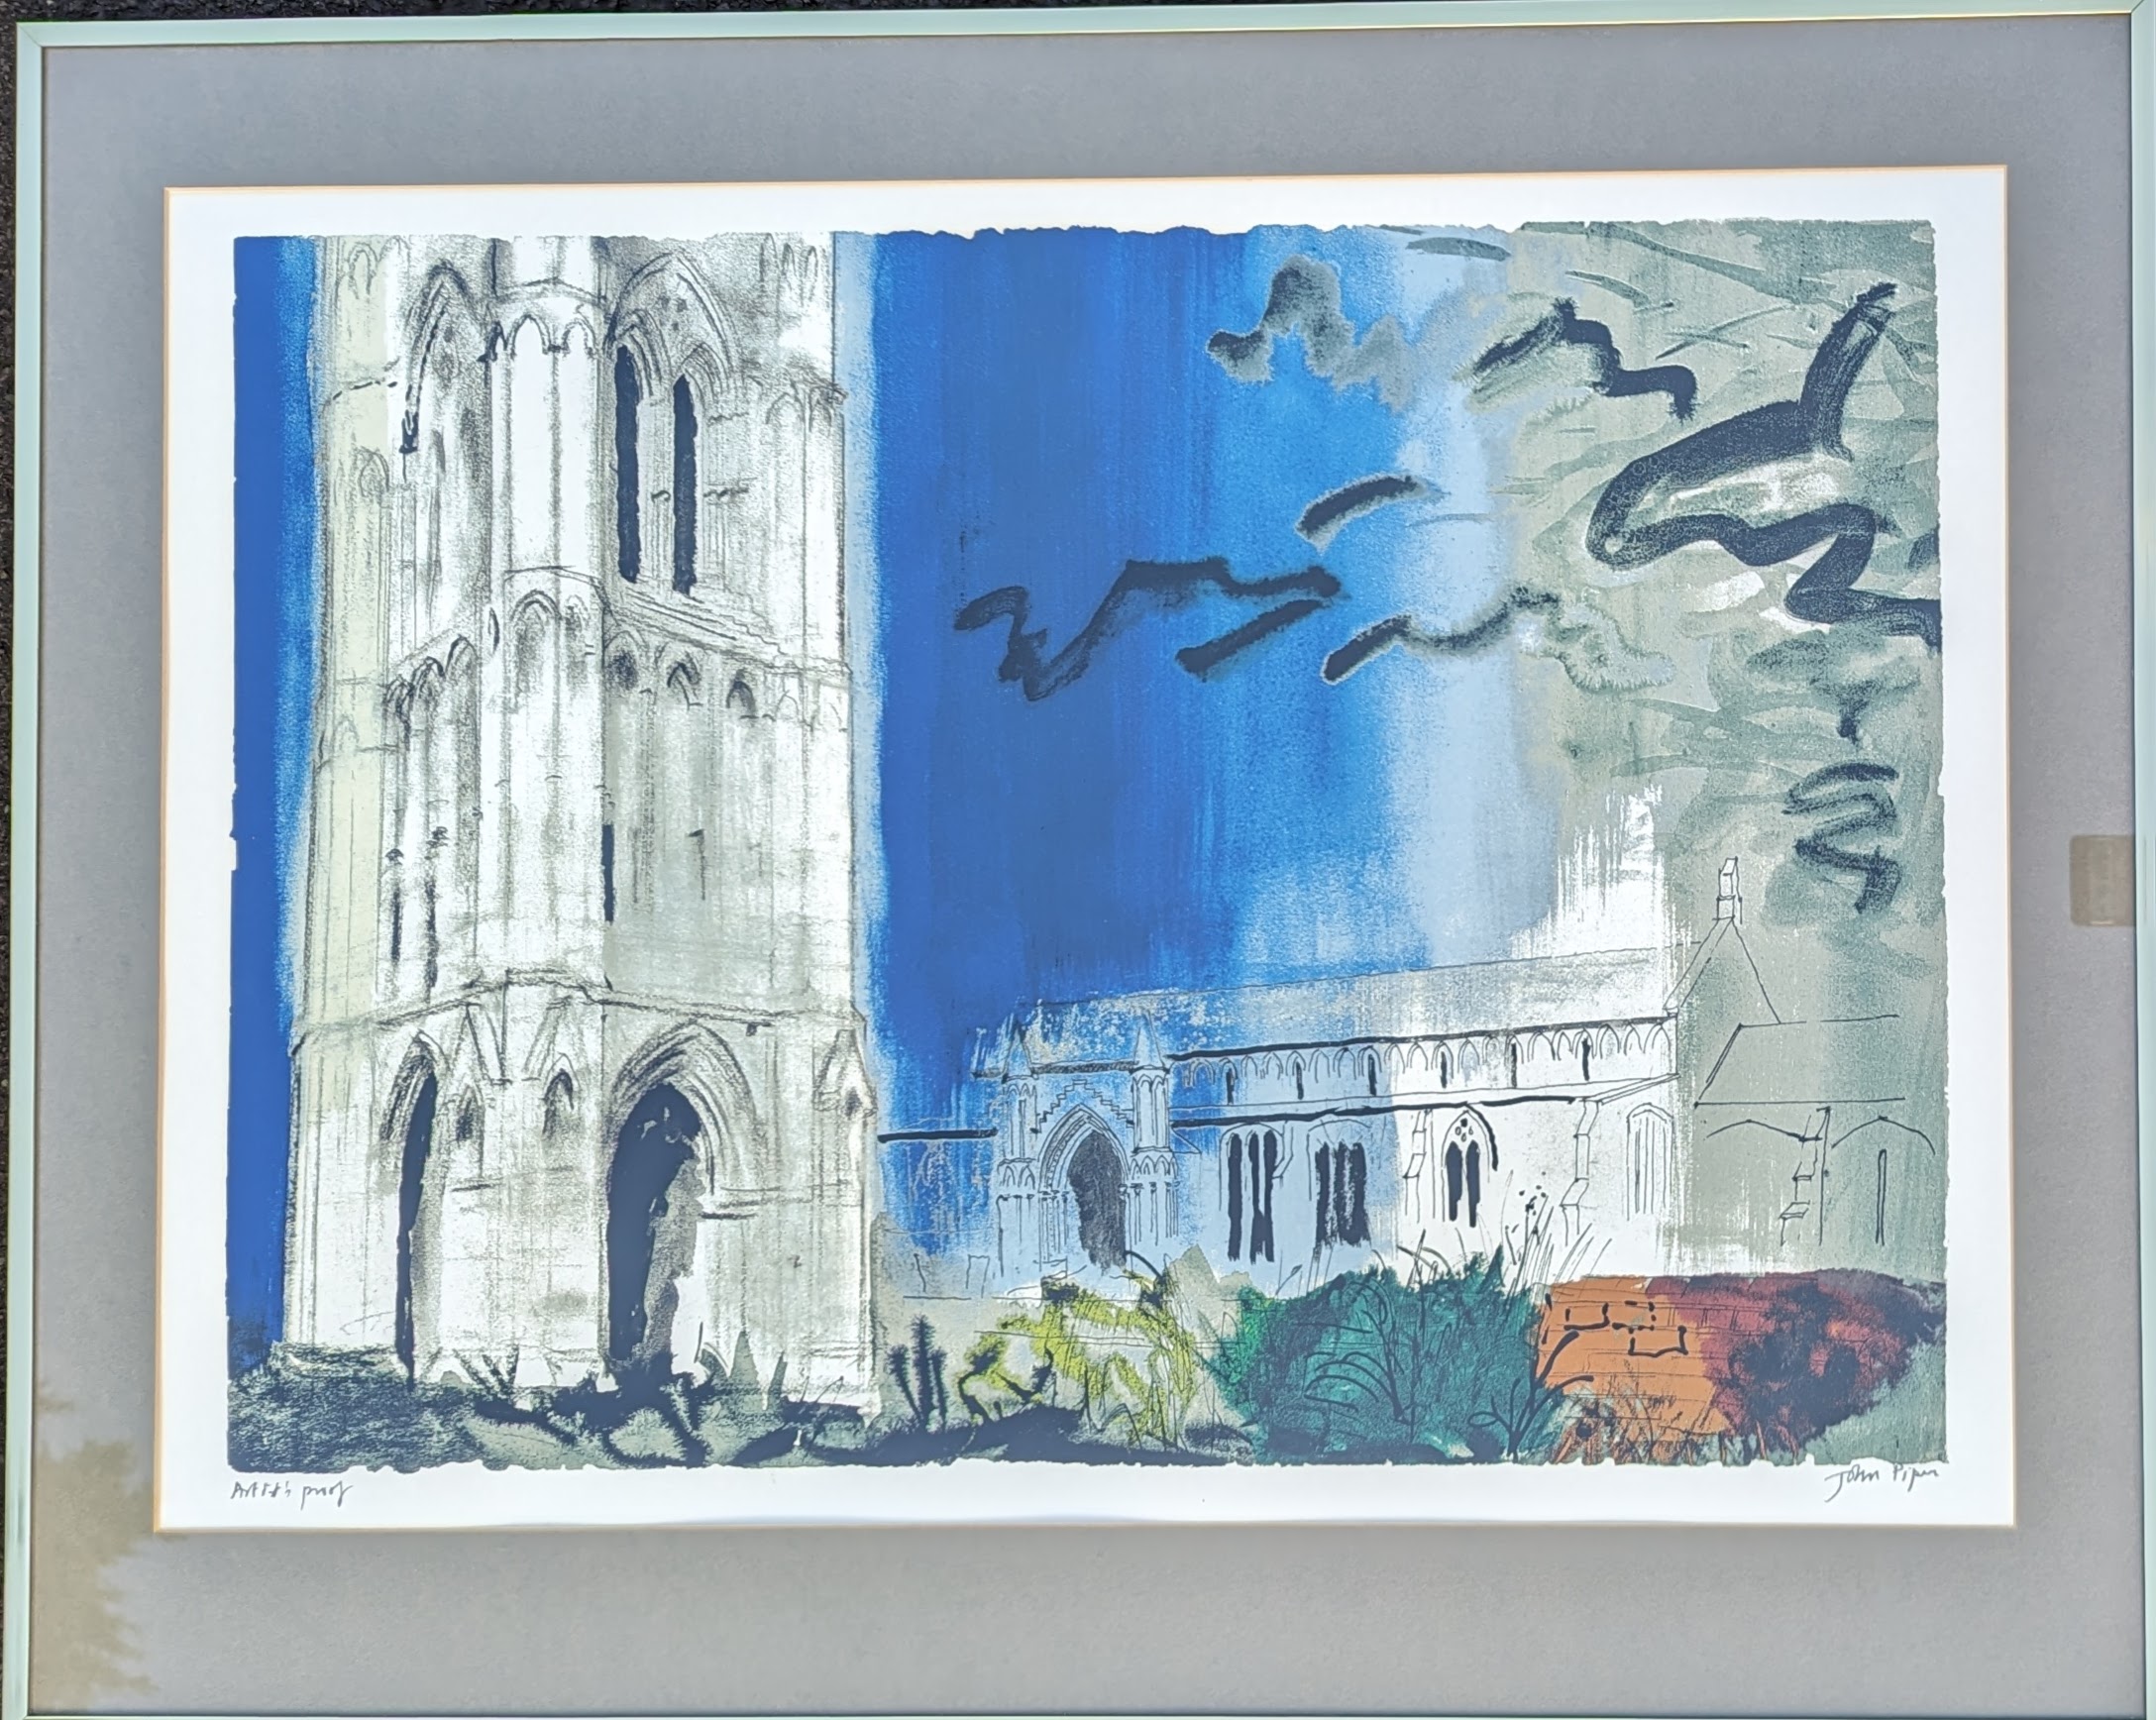 John Piper (1903–1992), WEST WALTON, a limited edition colour screenprint, A/P, signed in pencil - Image 5 of 5